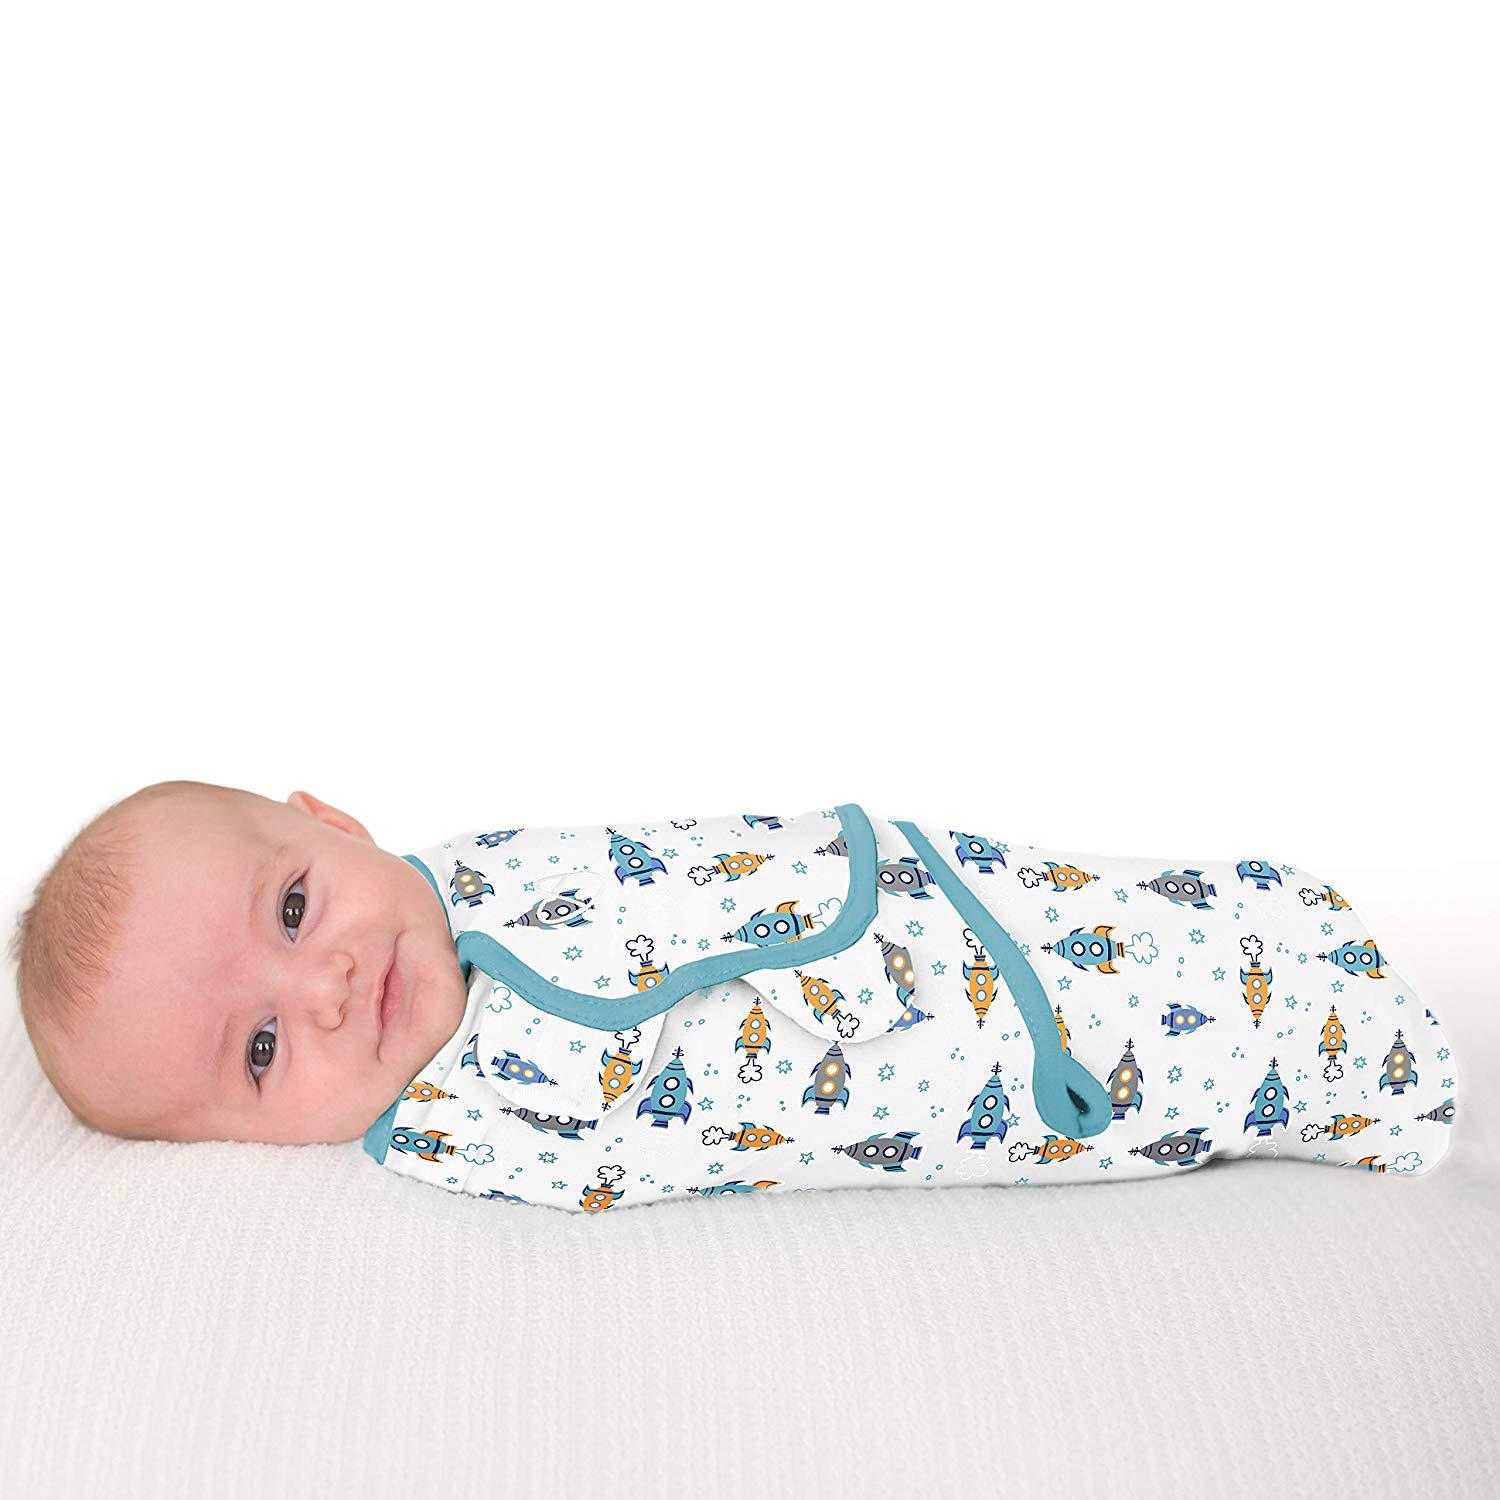 Baby Swaddle Adjustable Infant wrap- 0-3 Months -Pack of 2 - Any mix designs